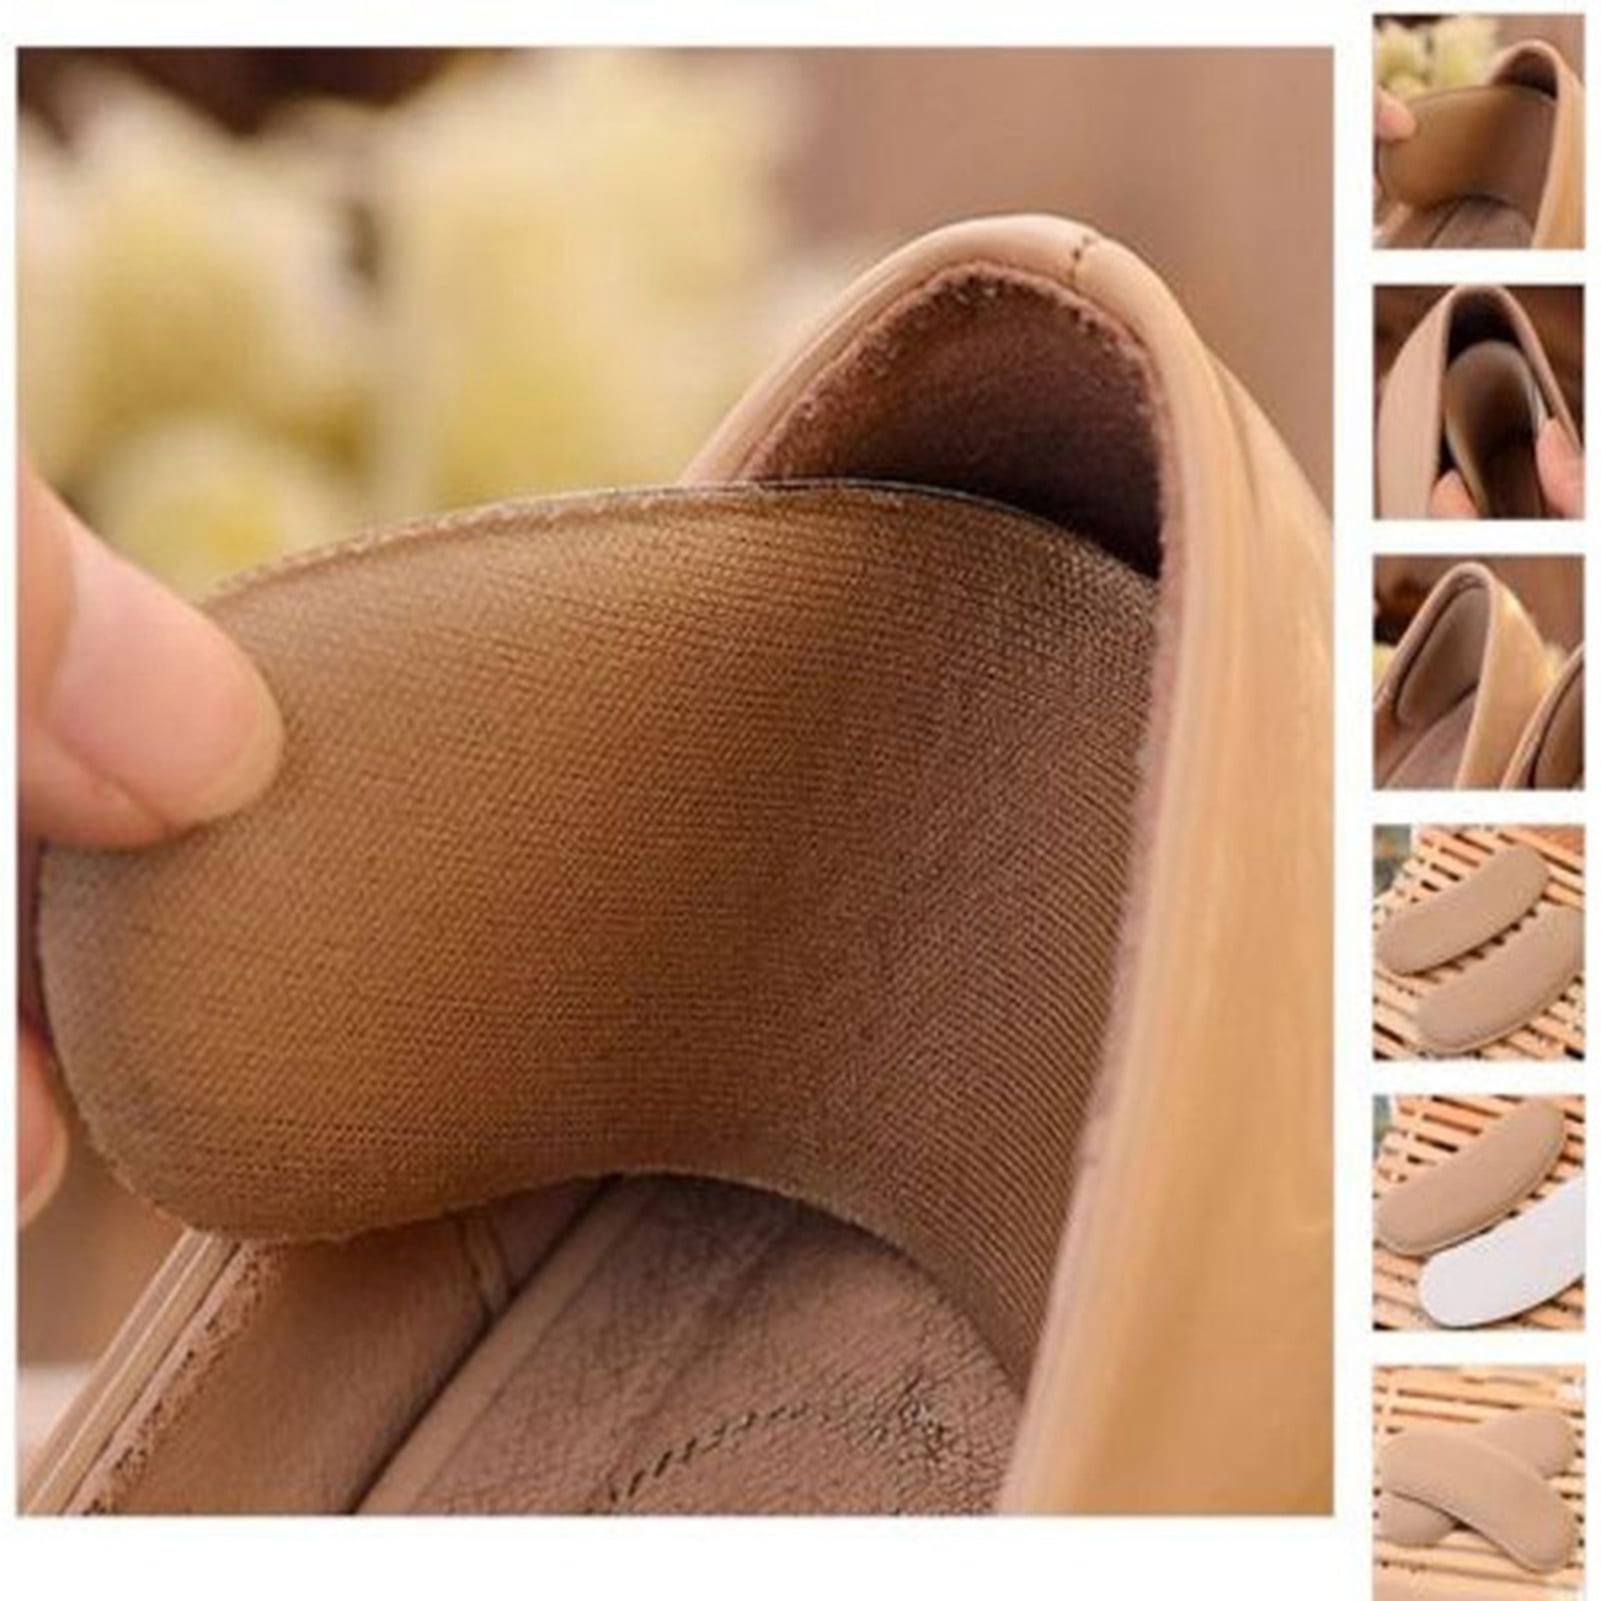 GENERIC 2Pcs Sticky Fabric Shoe Back Heel Inserts Insoles Pads Cushion  Liner Grips Sponge After Half a Yard Thick Pad Foot Care Z04901 :  Amazon.in: Shoes & Handbags